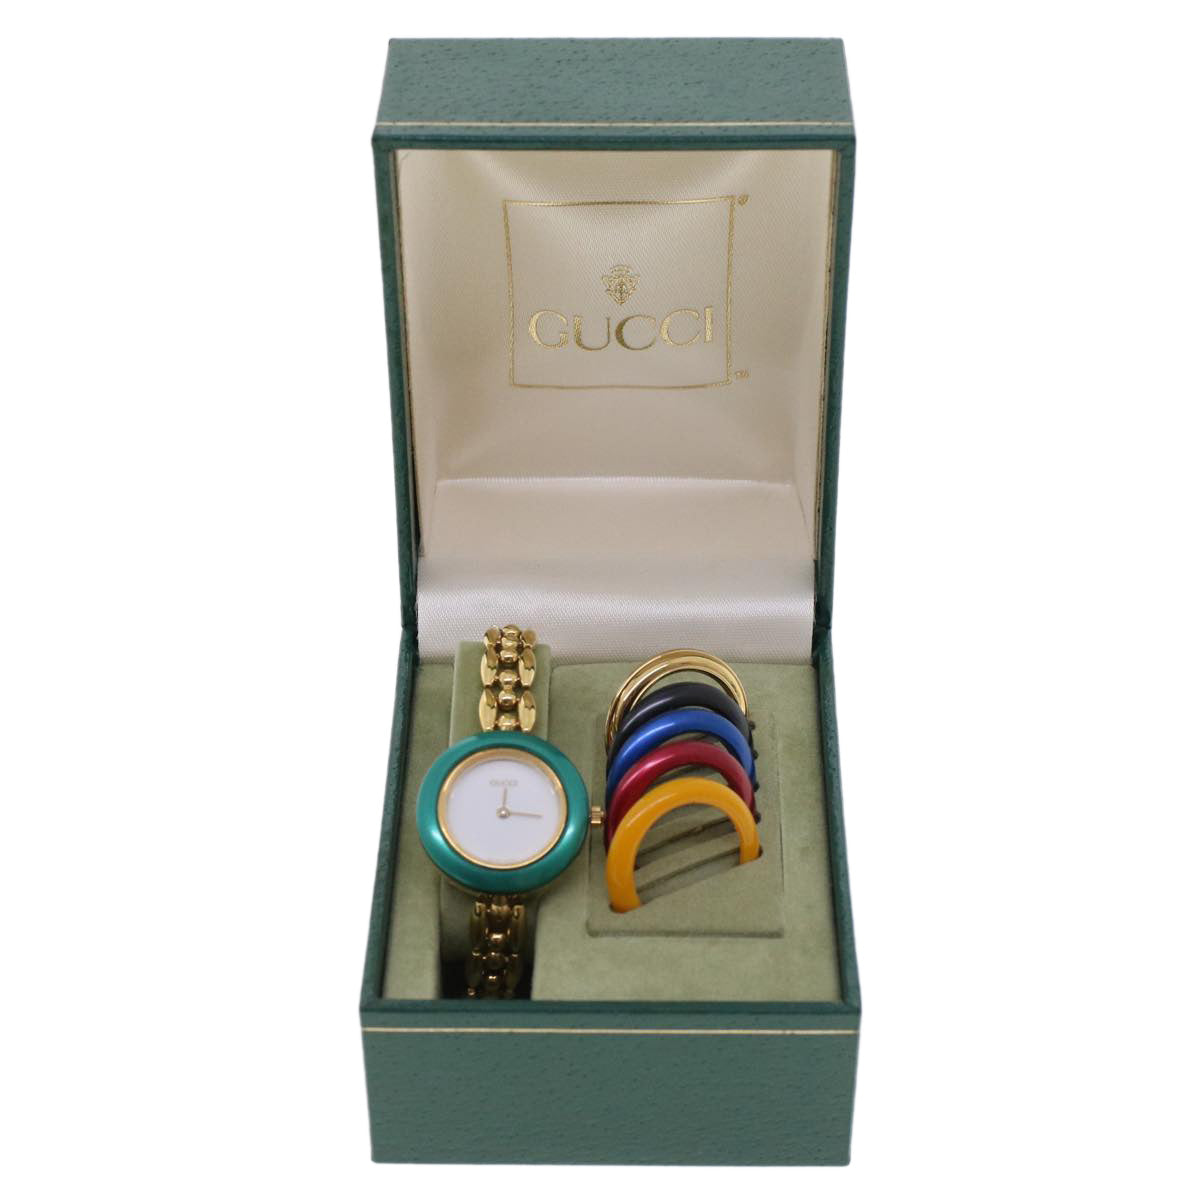 GUCCI Bezel 6 Metallic Color Watch Gold Green Red Auth am4518